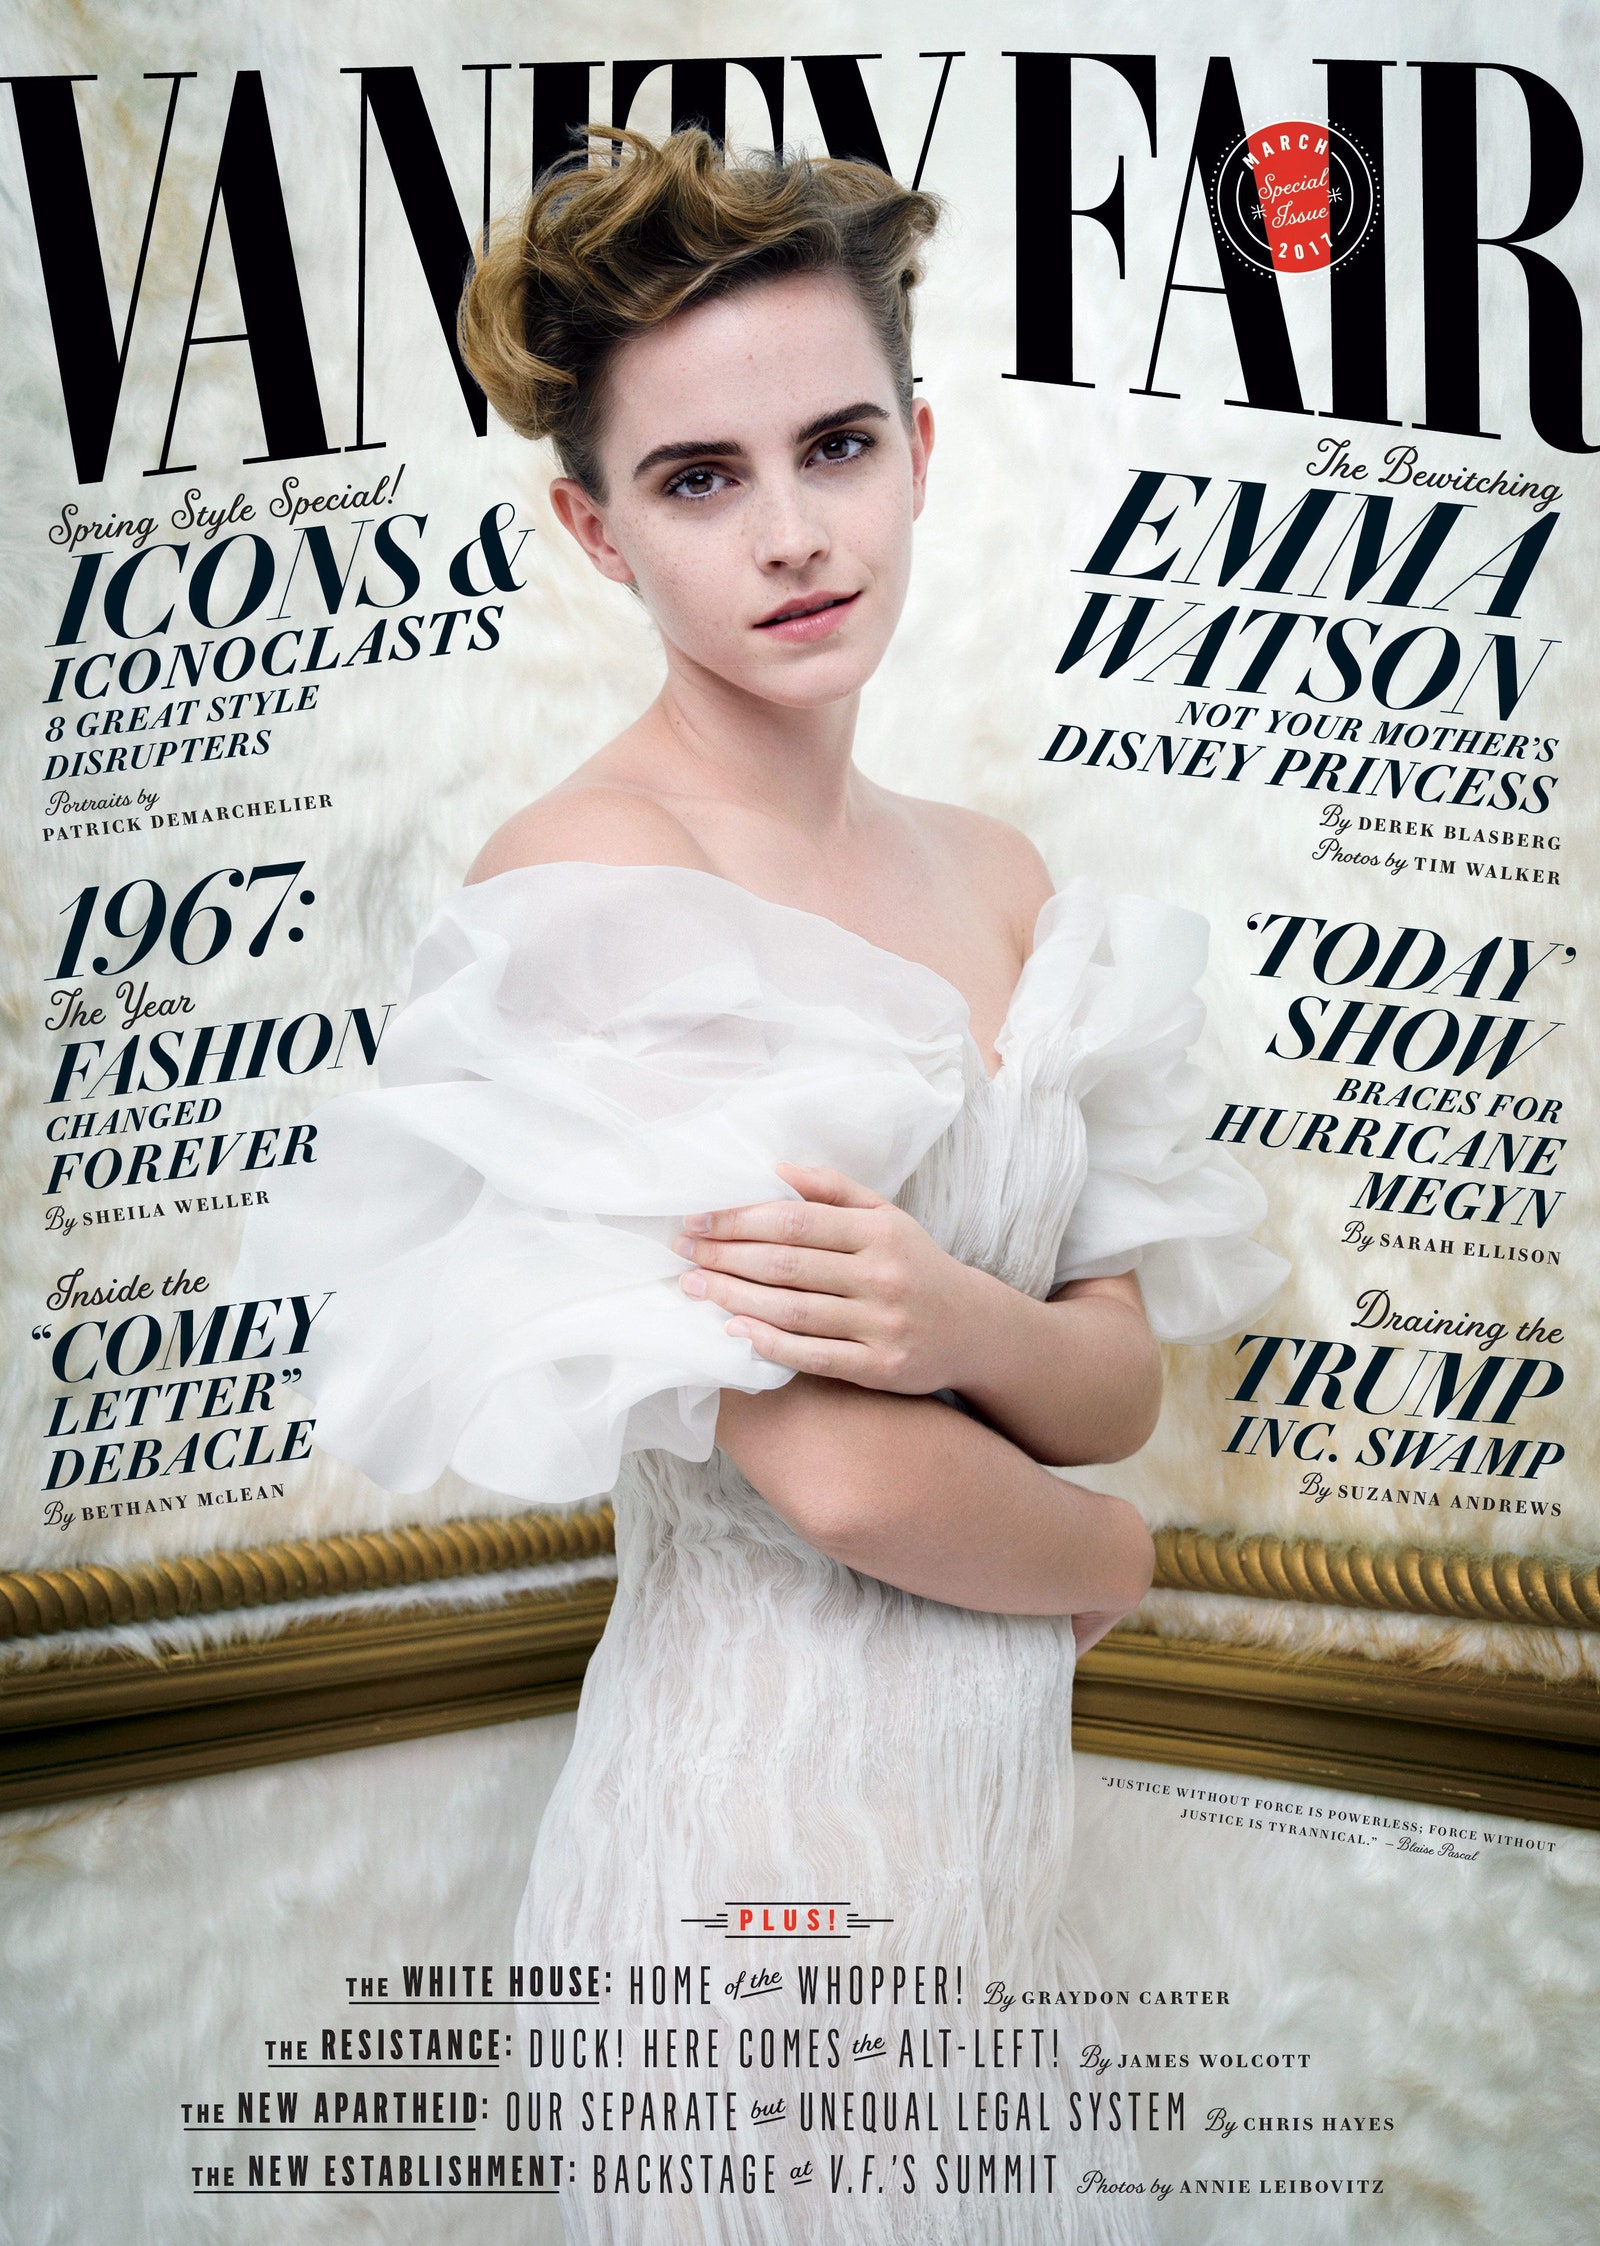 bucky jordan recommends has emma watson ever posed nude pic